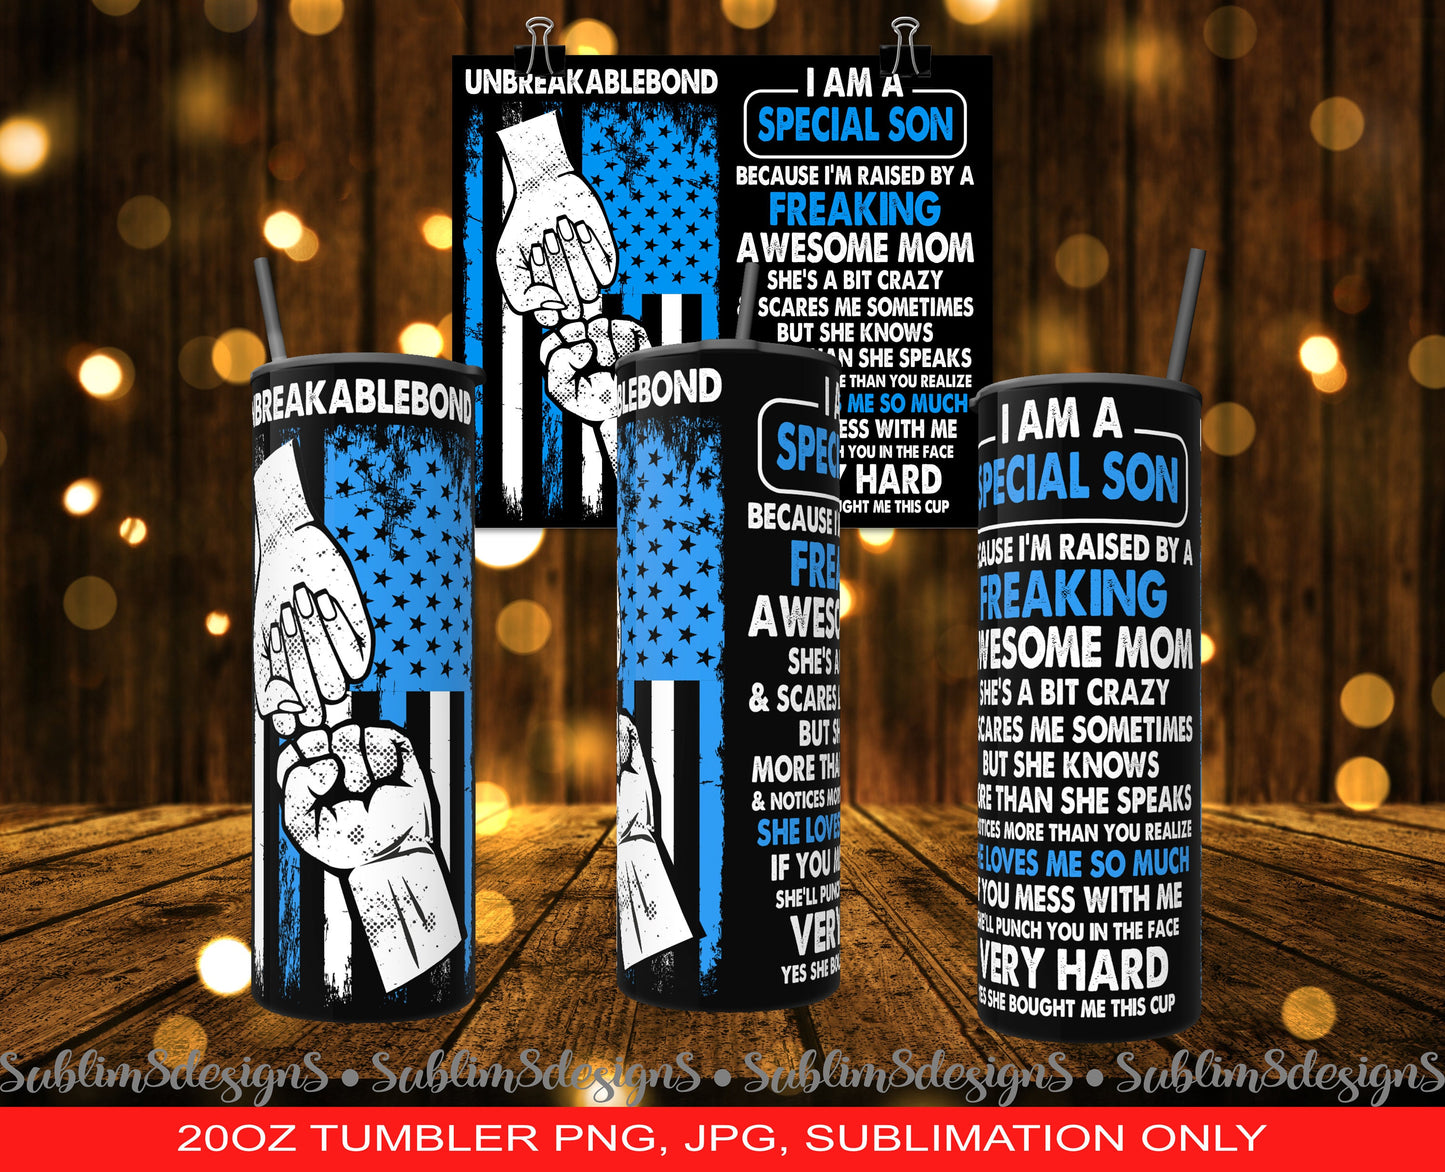 I Am A Special Son - Mother's Day Gift - Perfect for the ultimate momma's boy! -  Blue 20oz Tumbler Design PNG and JPG ONLY